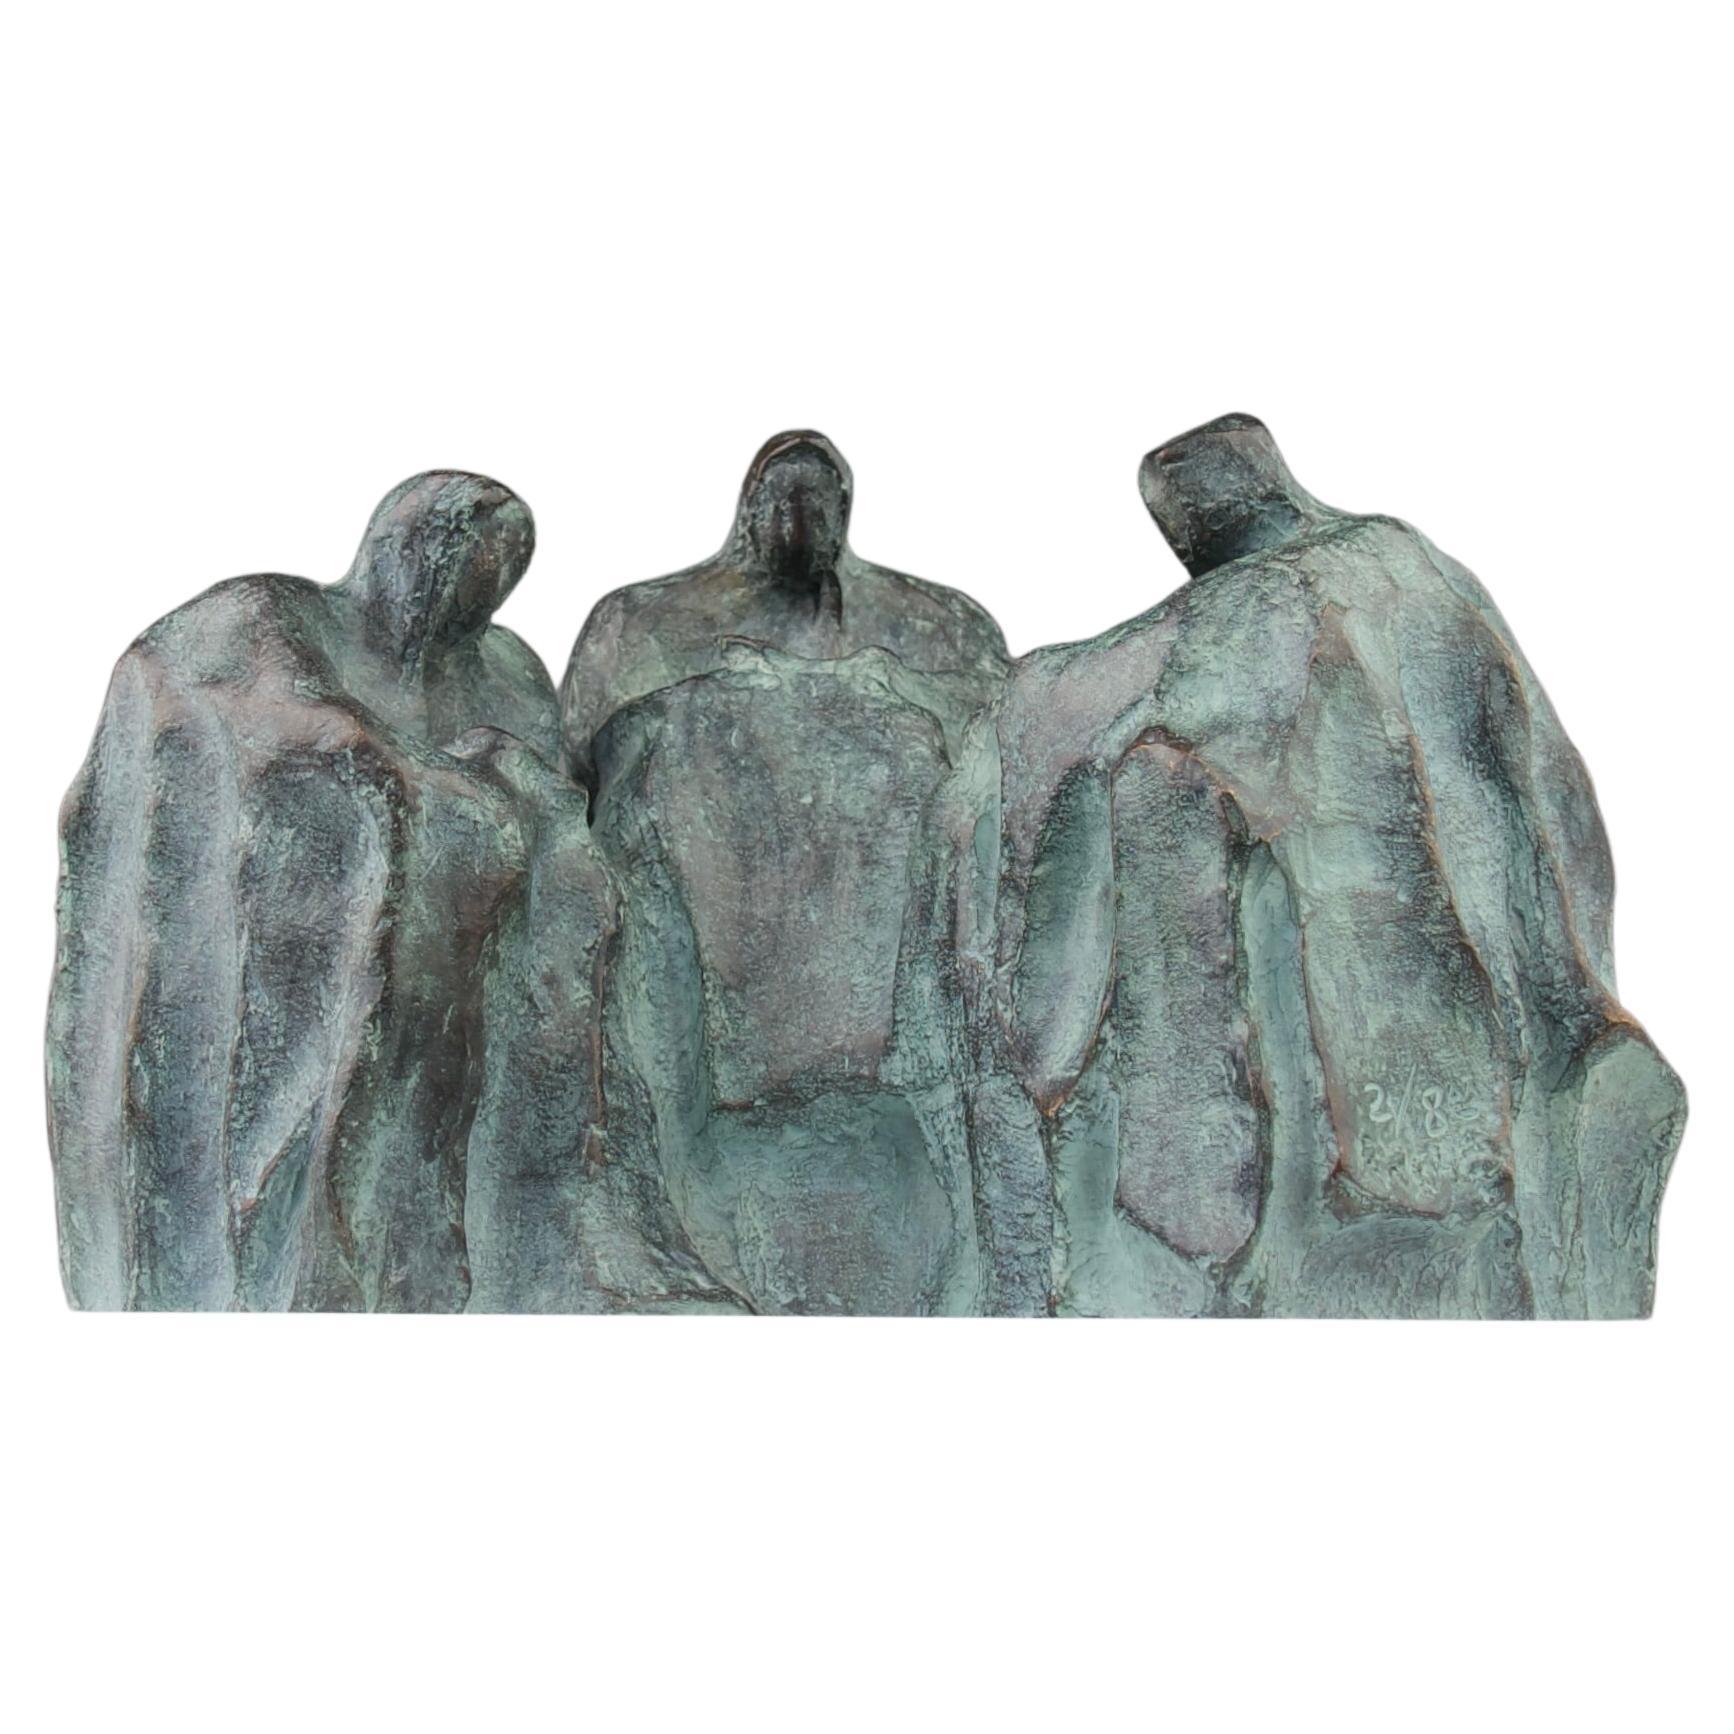 Rachel x Chapon Foundry, the Three Readers Sculpture, Bronze, France, 2000s For Sale